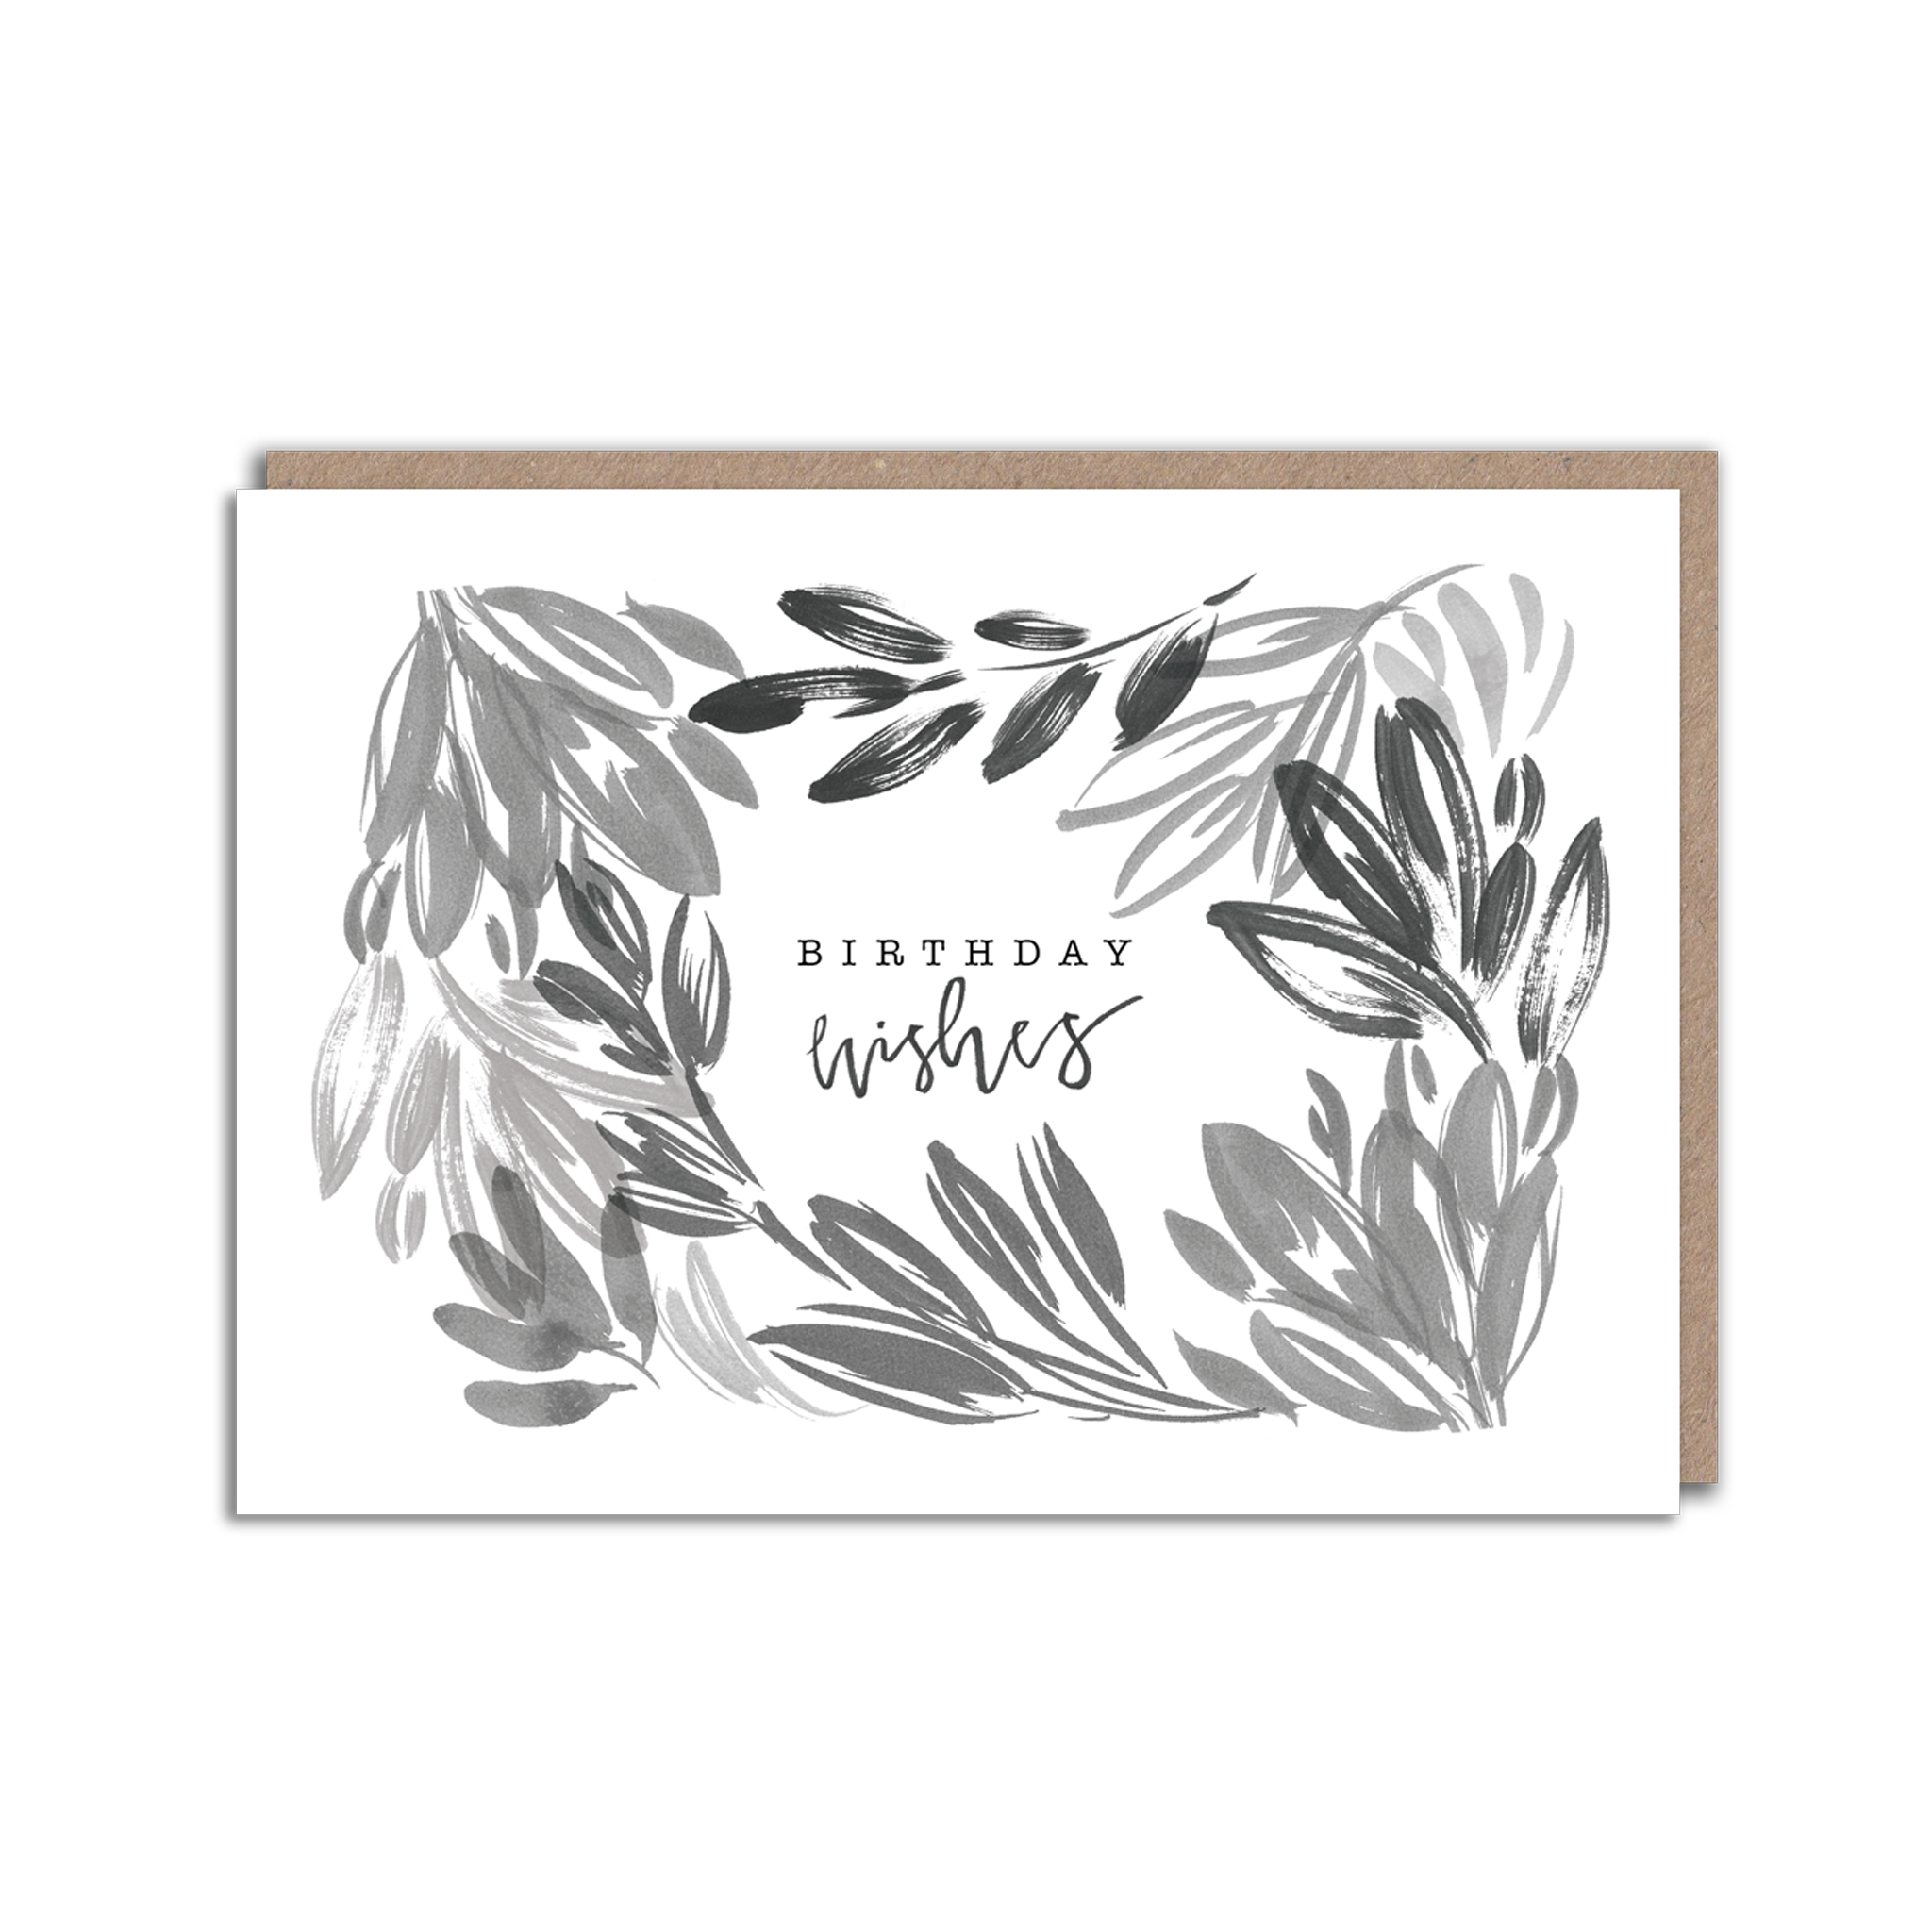 Black and white floral birthday wishes card